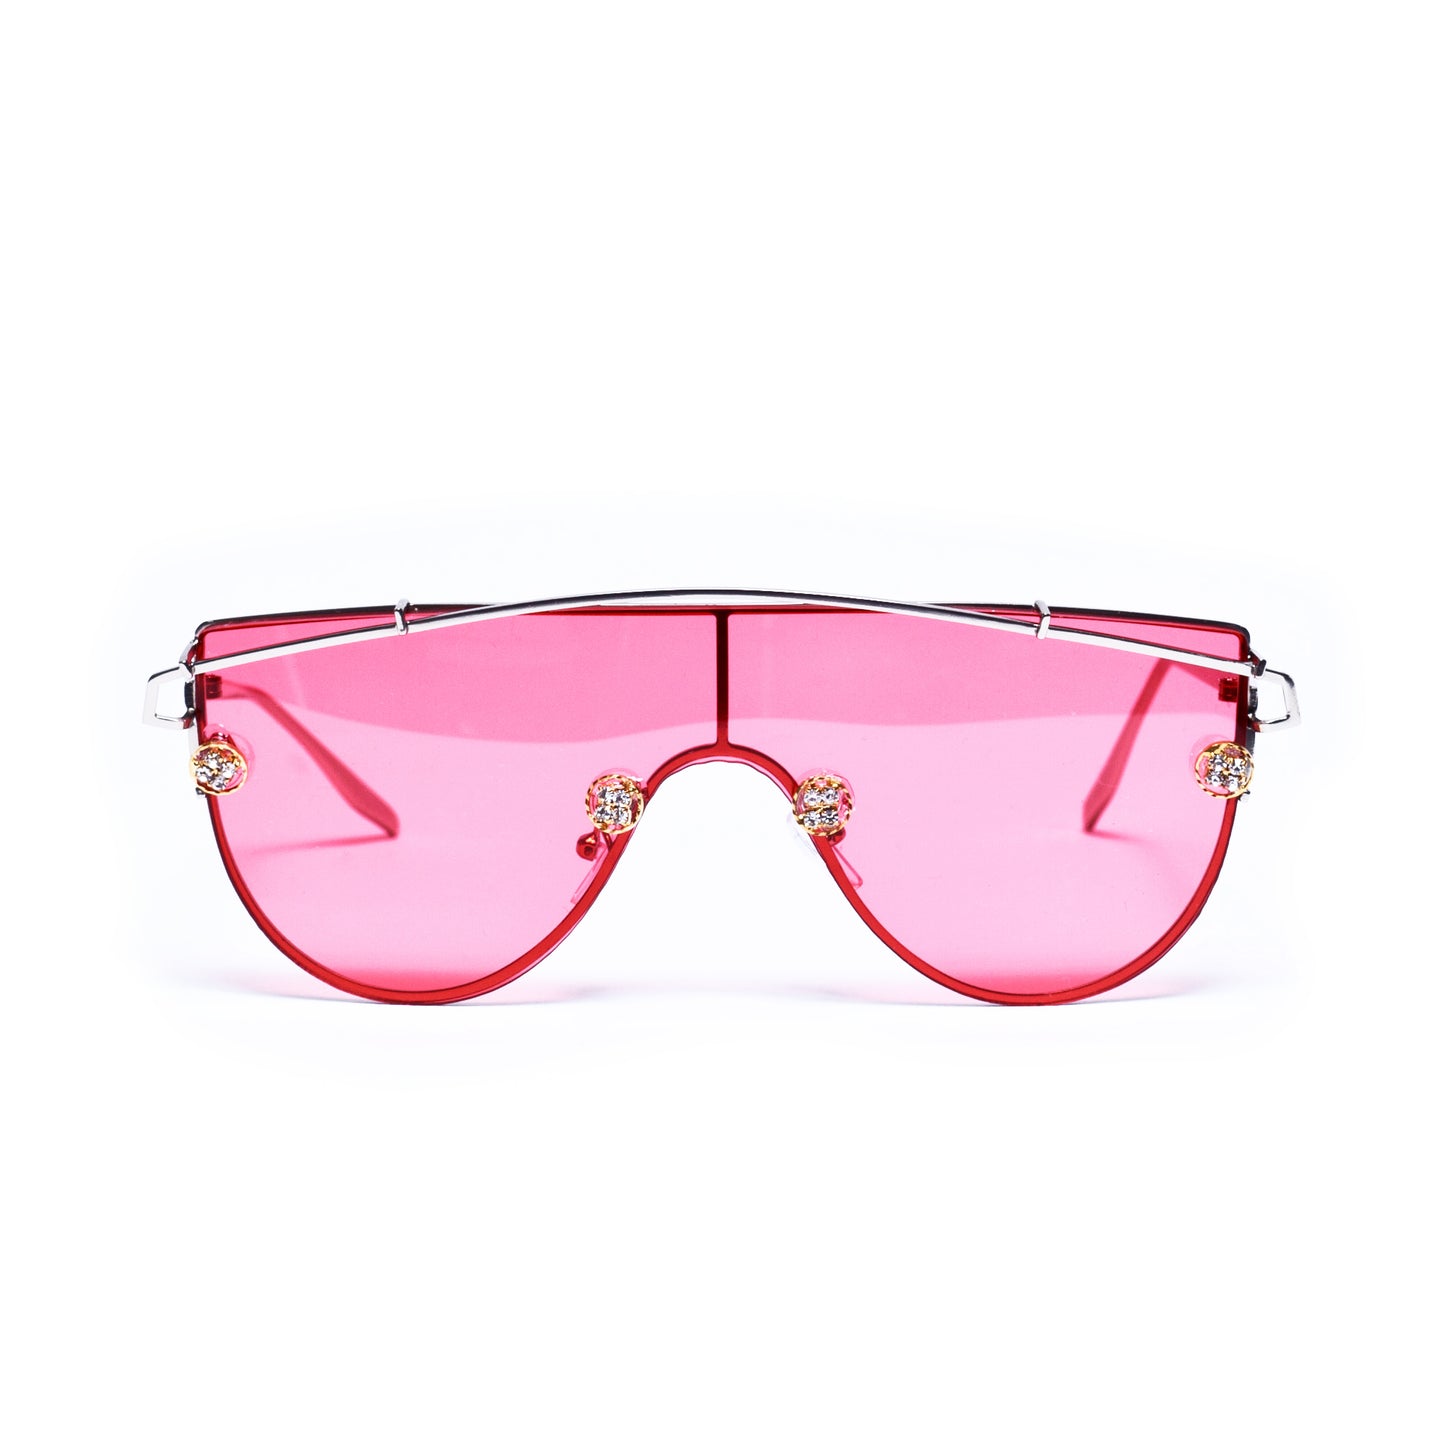 AT YOUR BEST IN CLEAR HOLOGRAM LENS Cherry Lens SUNNIES + OPTICS Sunglasses Collection, Tnemnroda man- NRODA